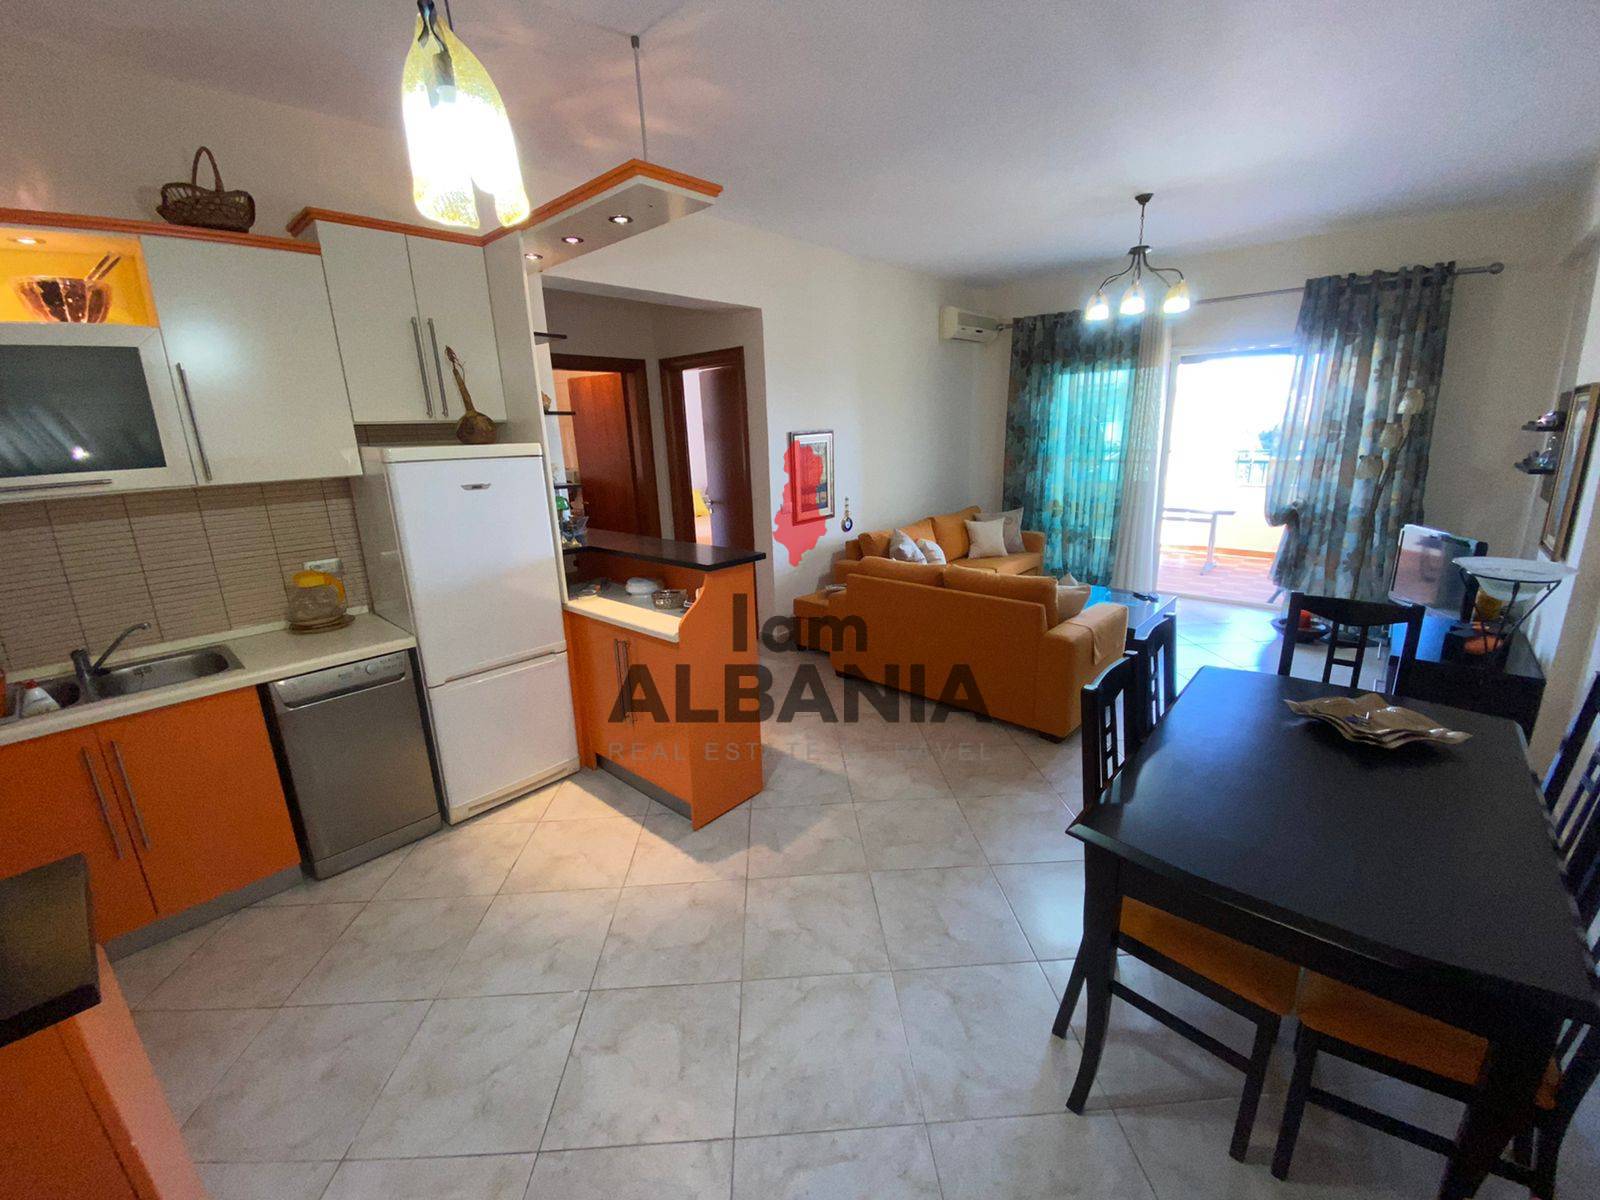 Albania, 3-room apartment right by the beach with a view of the sea